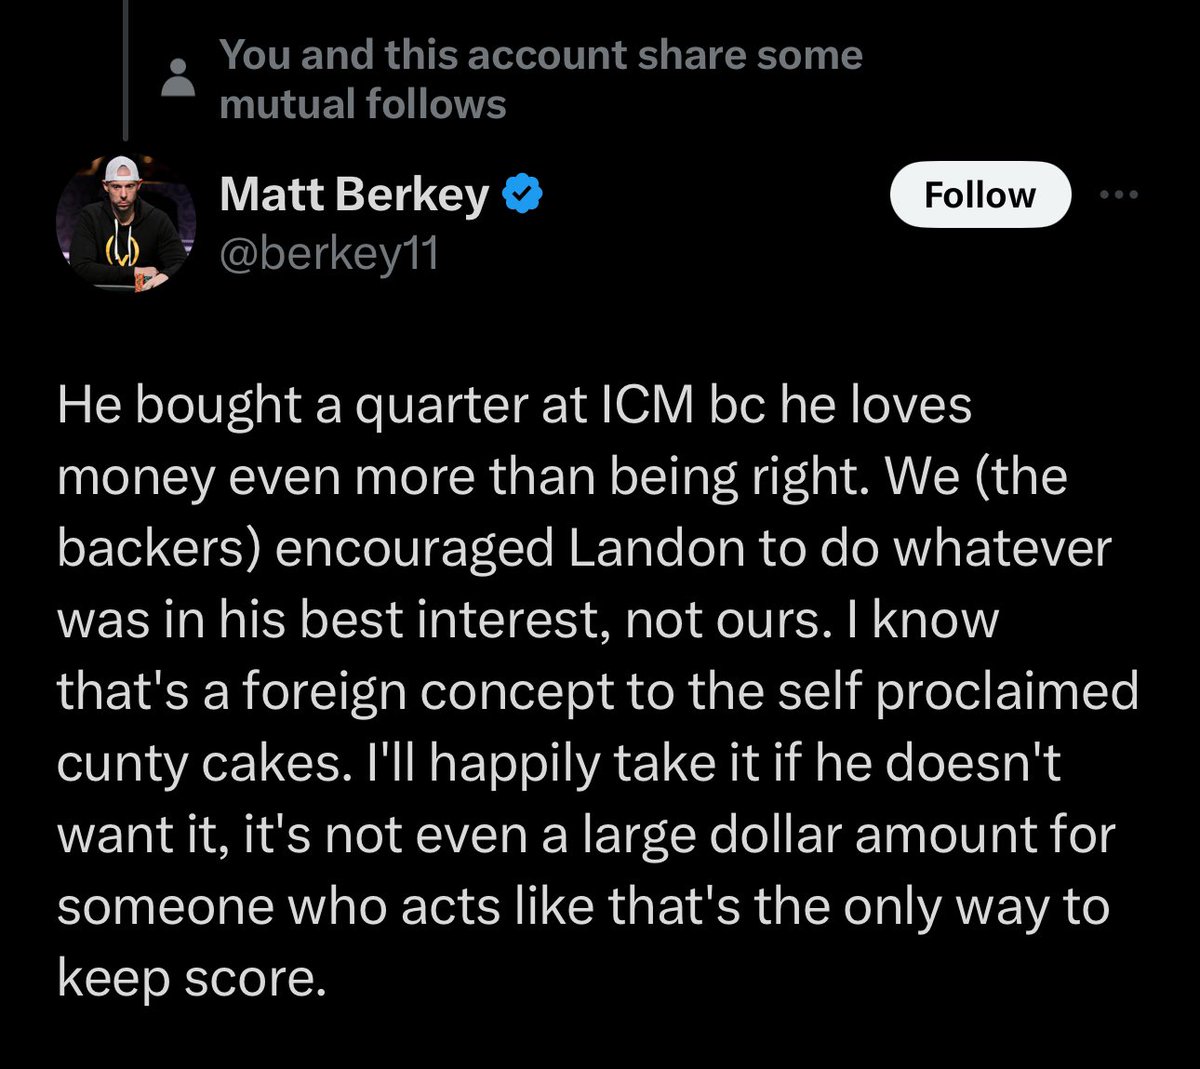 The retard @berkey11 insults me for giving Landon 100k in gambling money and says he’s happy to buy the action himself. Straight liar If he was happy to take the action himself why is it being shopped around as we speak? Truth is he does want it he’s just an internet larp who…